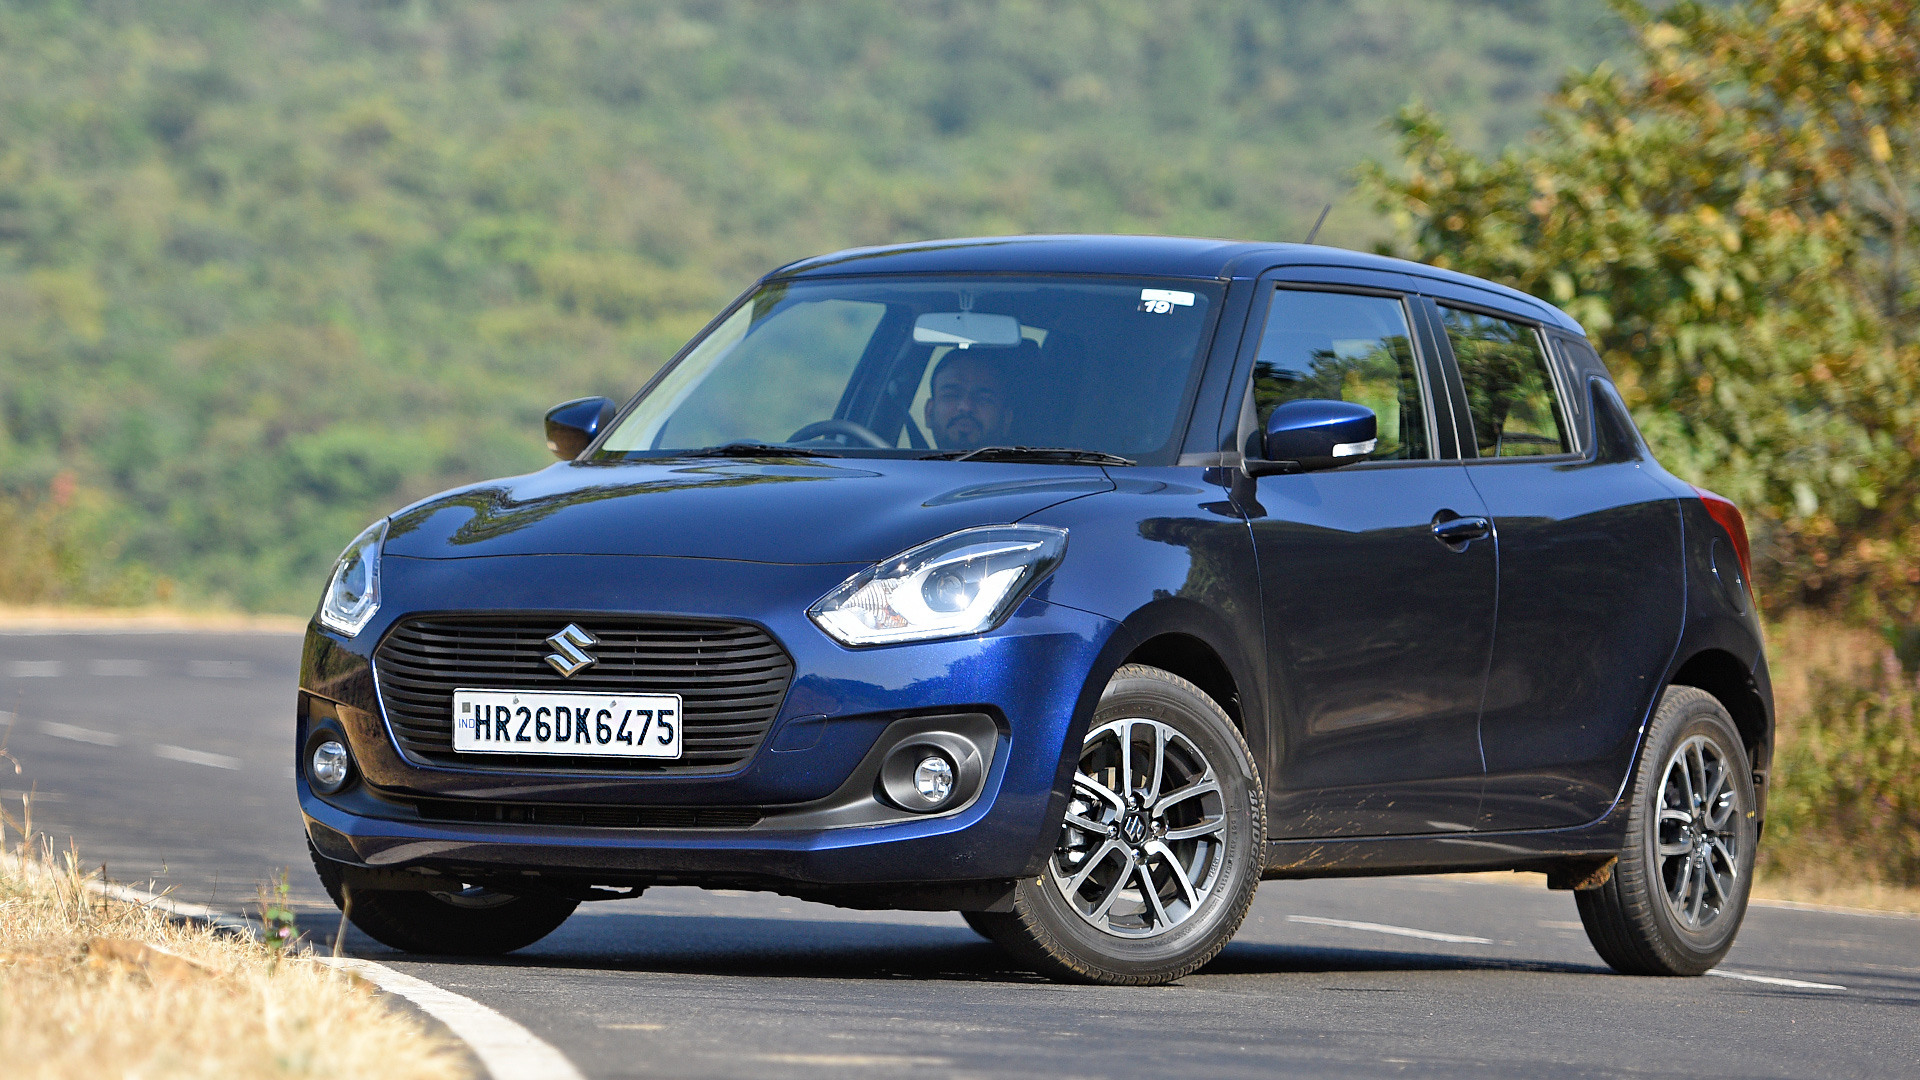 Maruti Suzuki Swift 2021 - Price in India, Mileage, Reviews, Colours,  Specification, Images - Overdrive